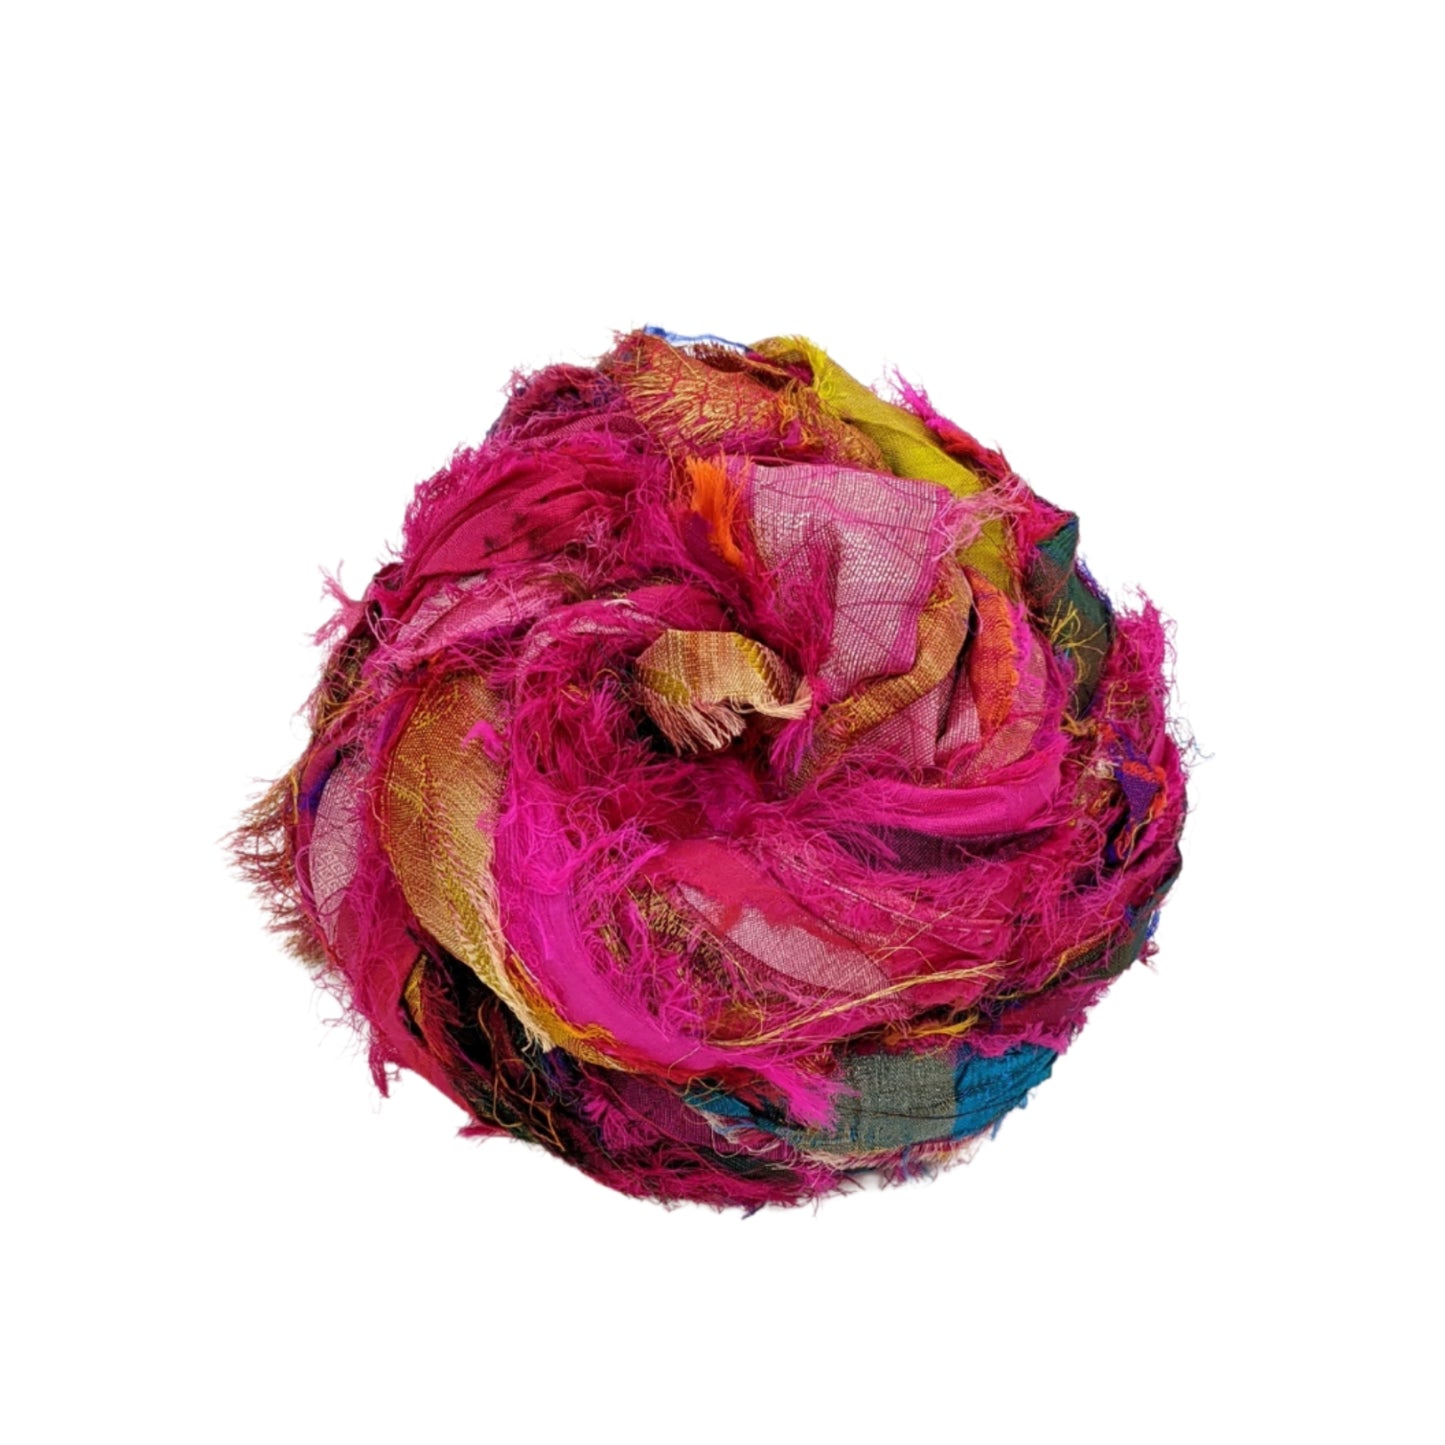 An overhead view of windswept Sari Silk Ribbon on a white background. In the magenta colorway.